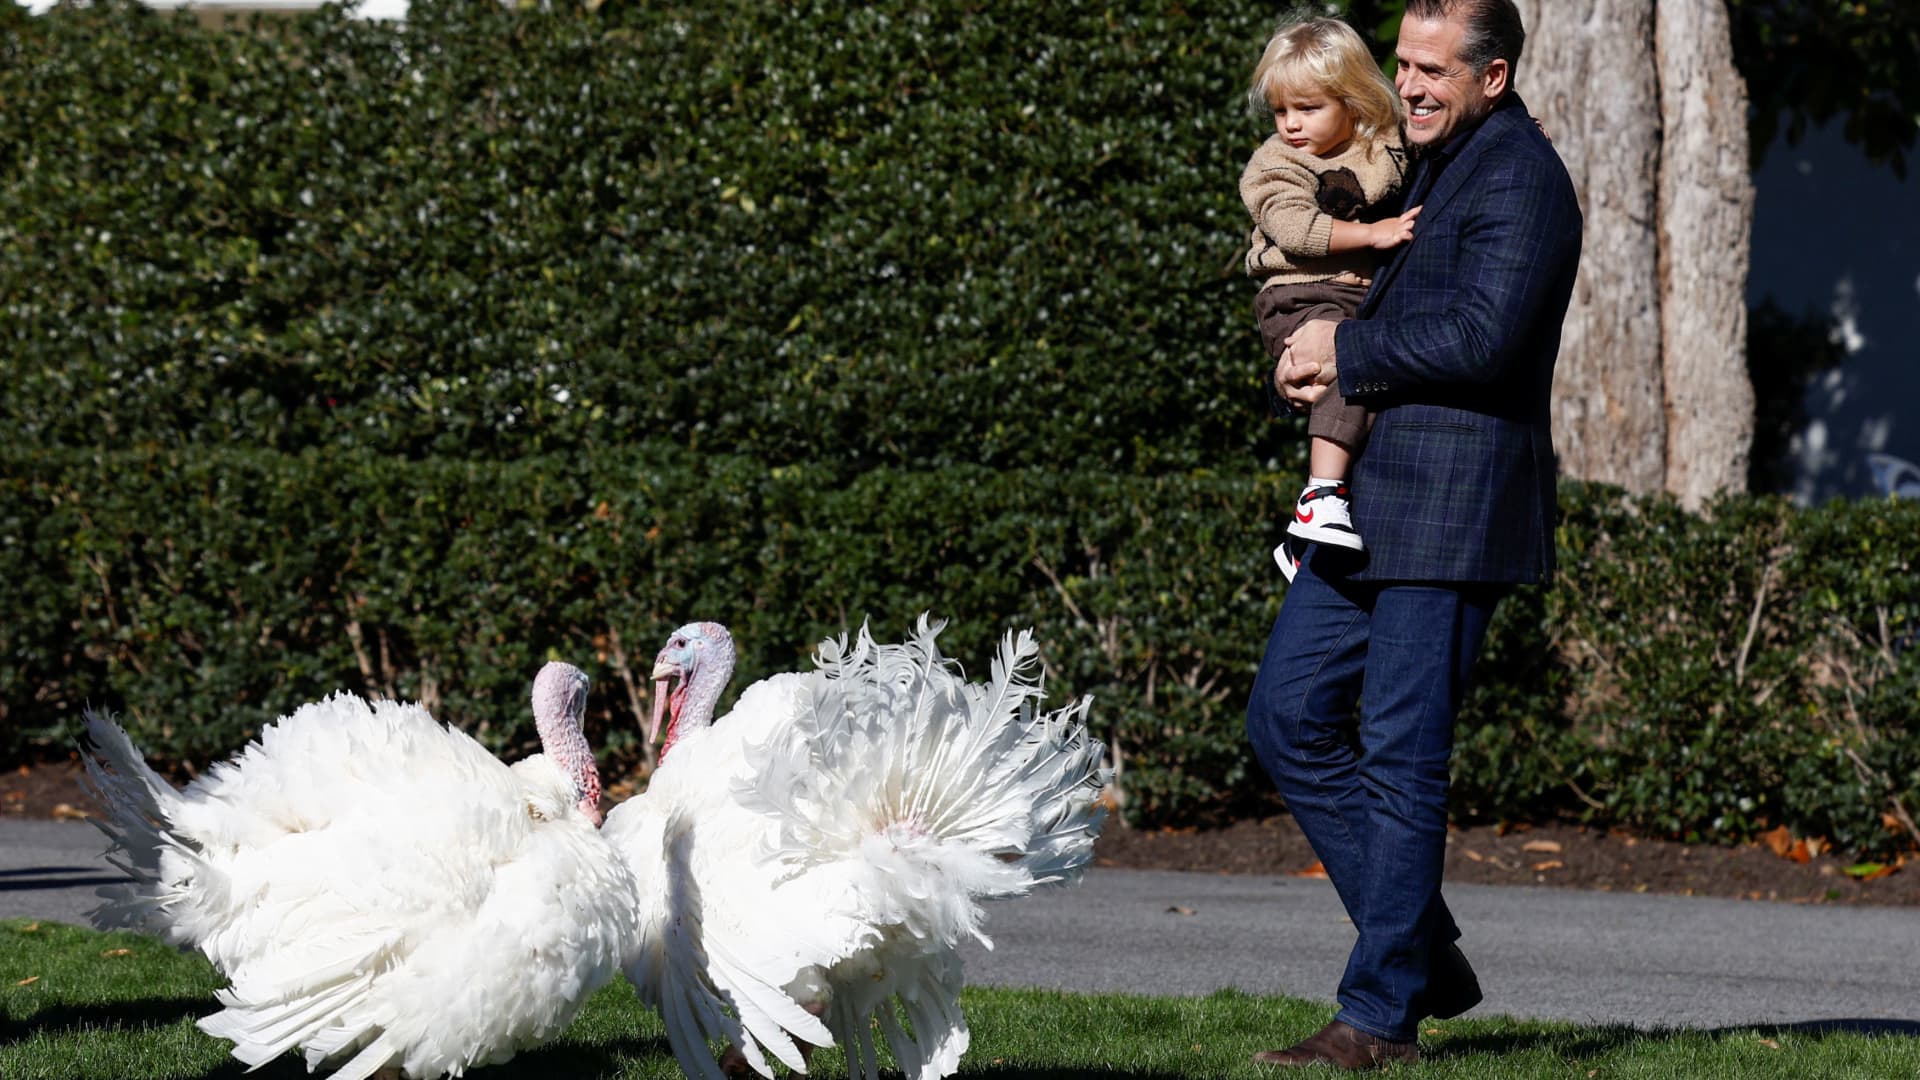 Hunter Biden and his son Beau Biden attend the annual ceremony to pardon Chocolate and Chip, the National Thanksgiving Turkeys on the South Lawn of the White House, in Washington, U.S., November 21, 2022. 